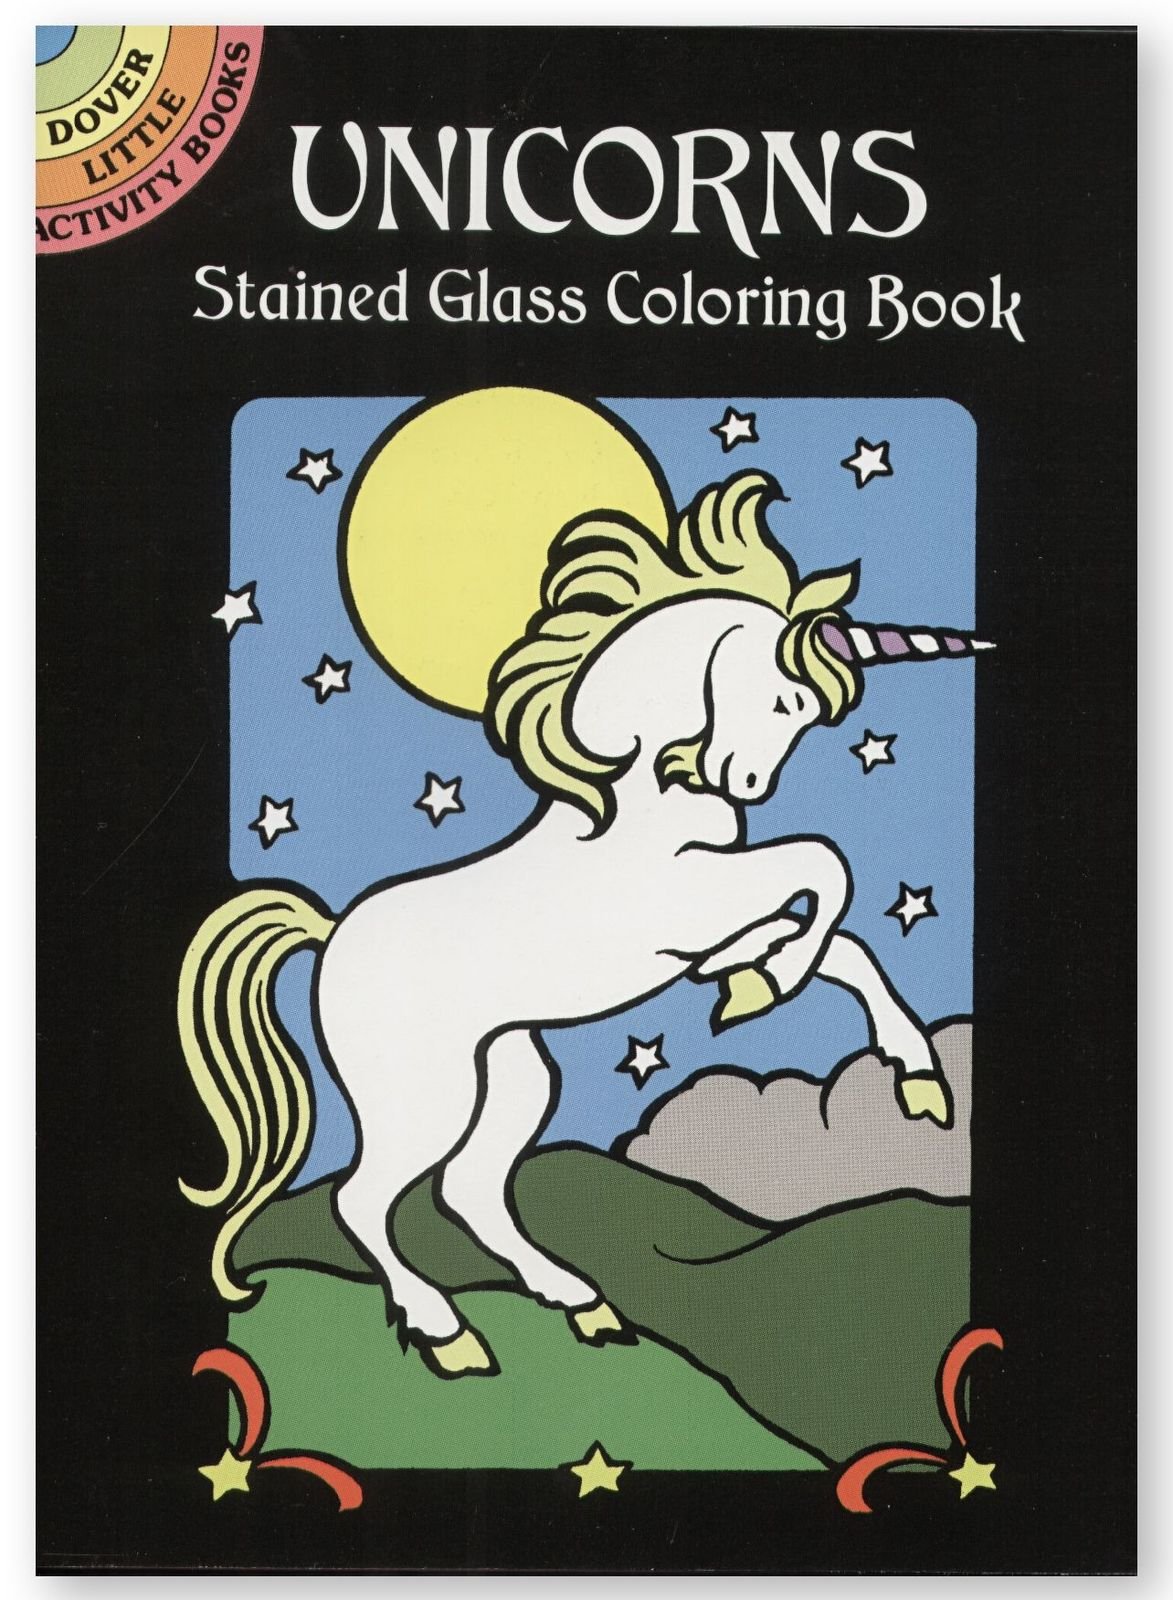 Dover - Unicorns Stained Glass Coloring Book